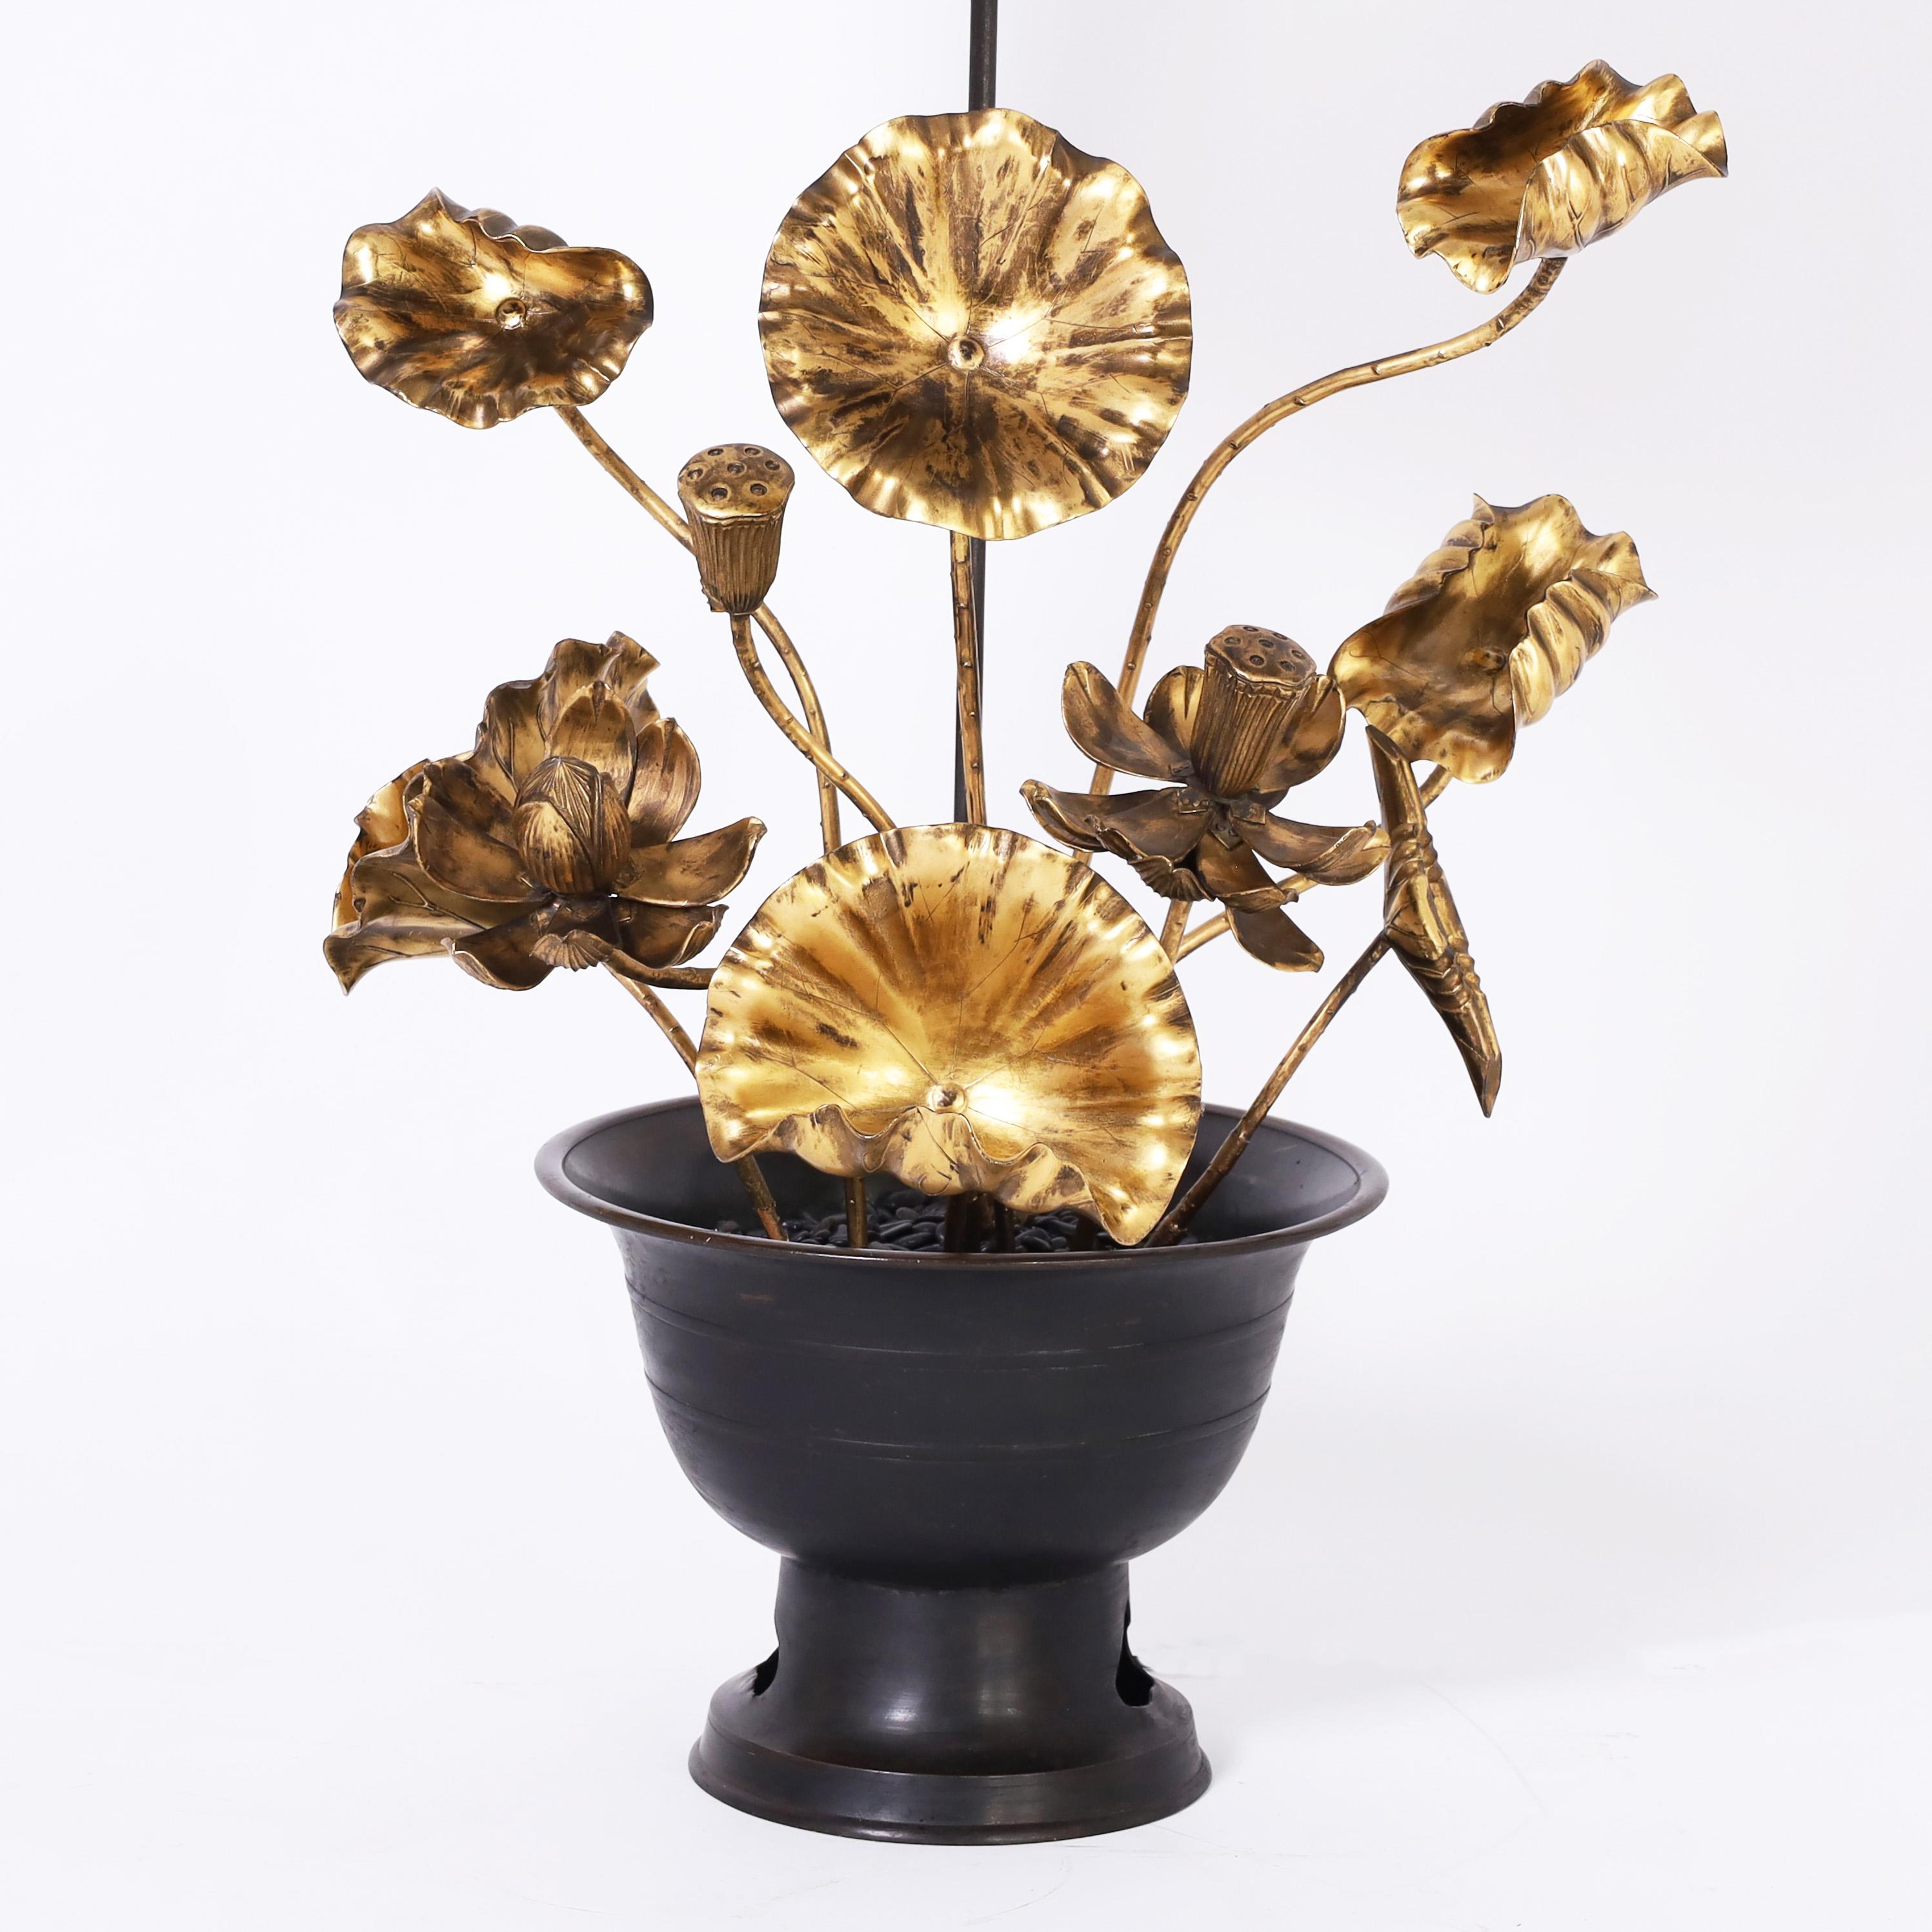 Standout mid century Japanese table lamp having hand carved wood lotus leaves and flowers with a gilt finish, in a classic bronze urn with black stones in the top.